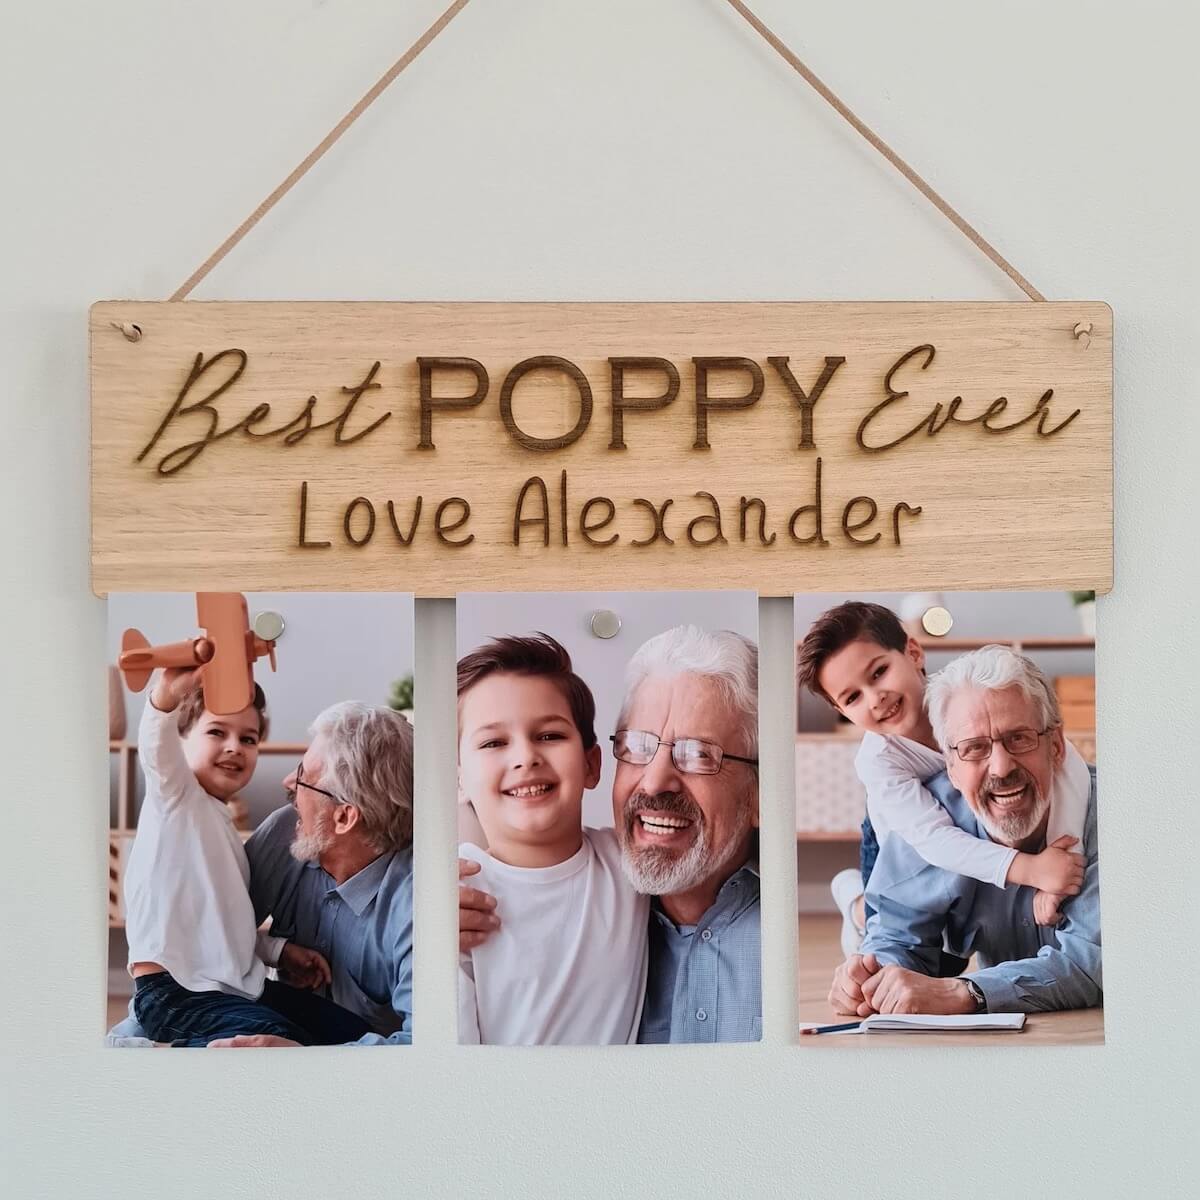 best poppy ever wall hanging photo frame